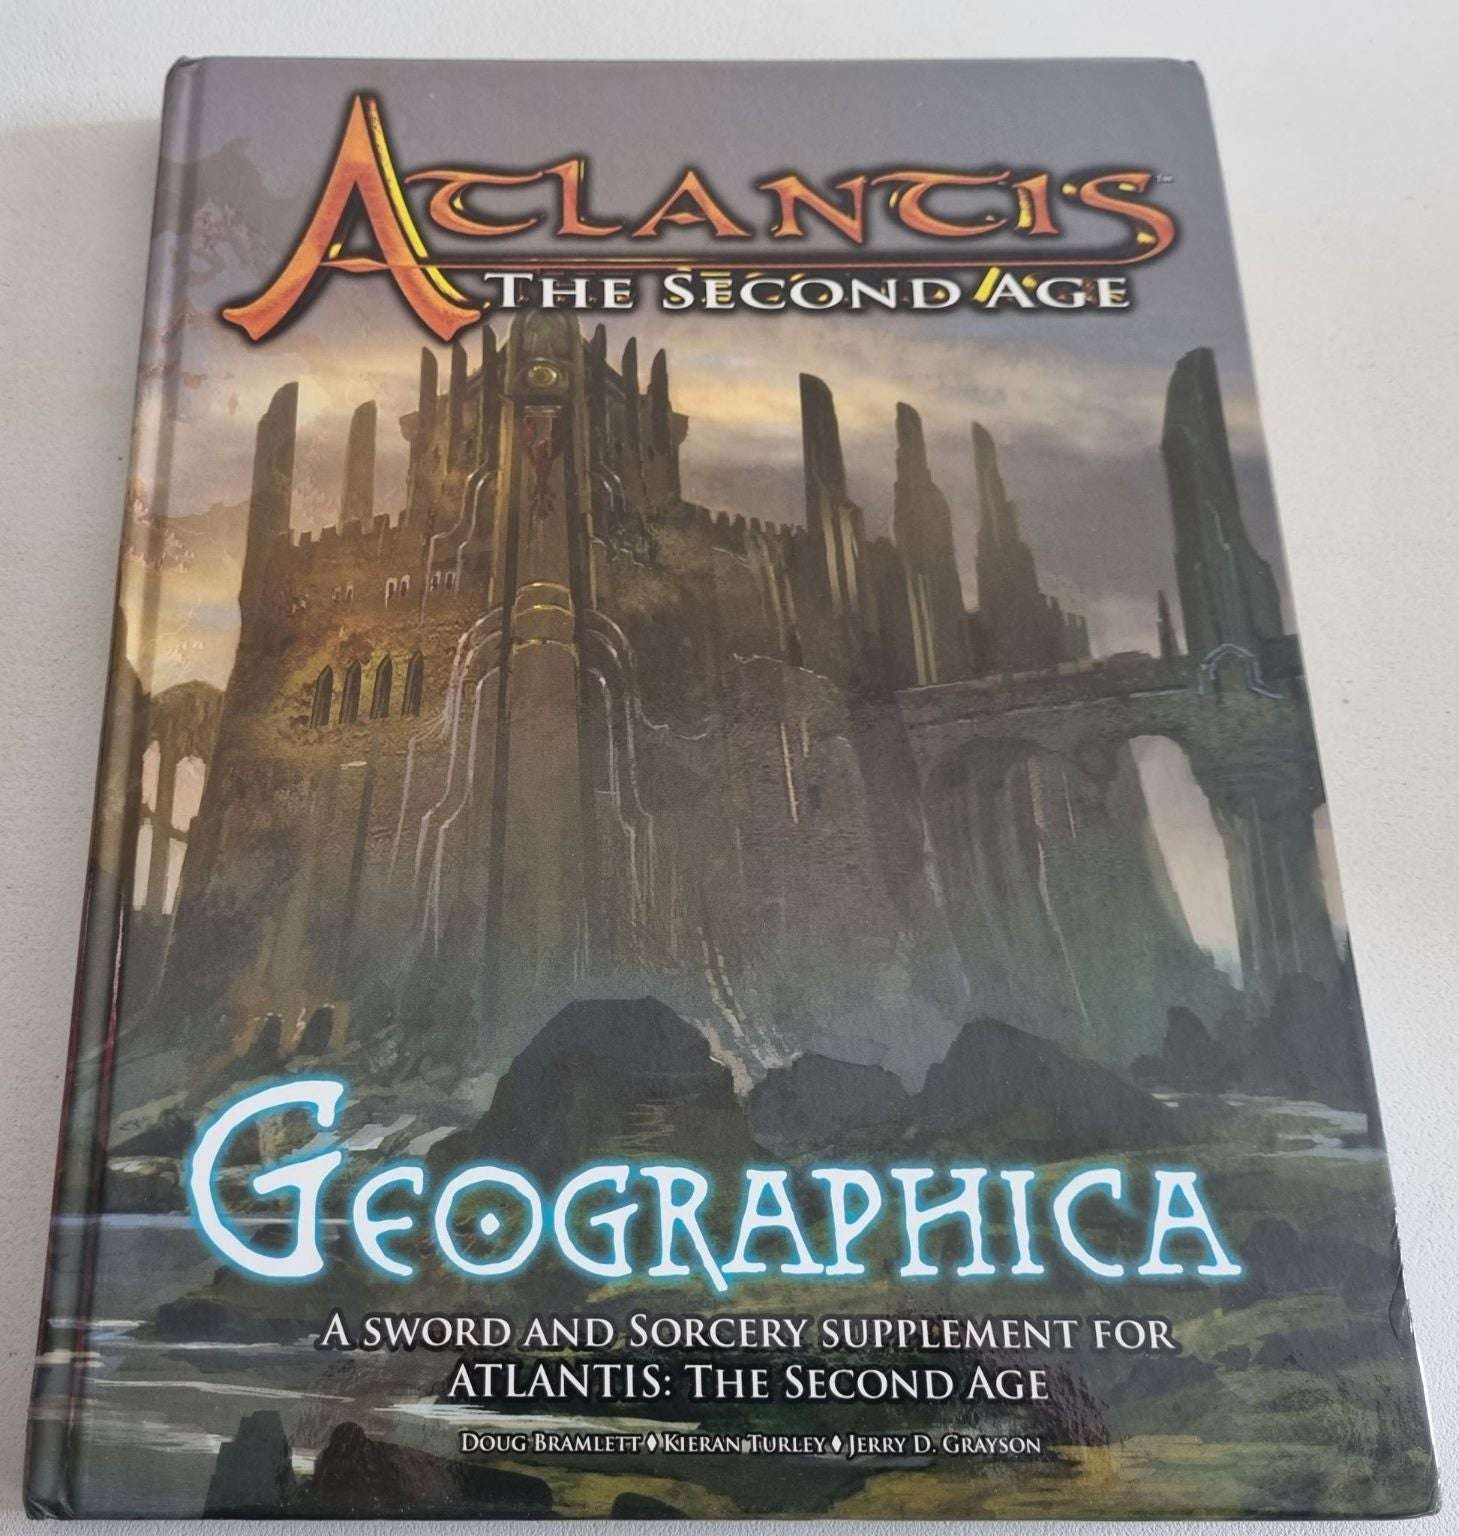 Atlantis The Second Age: Geographica